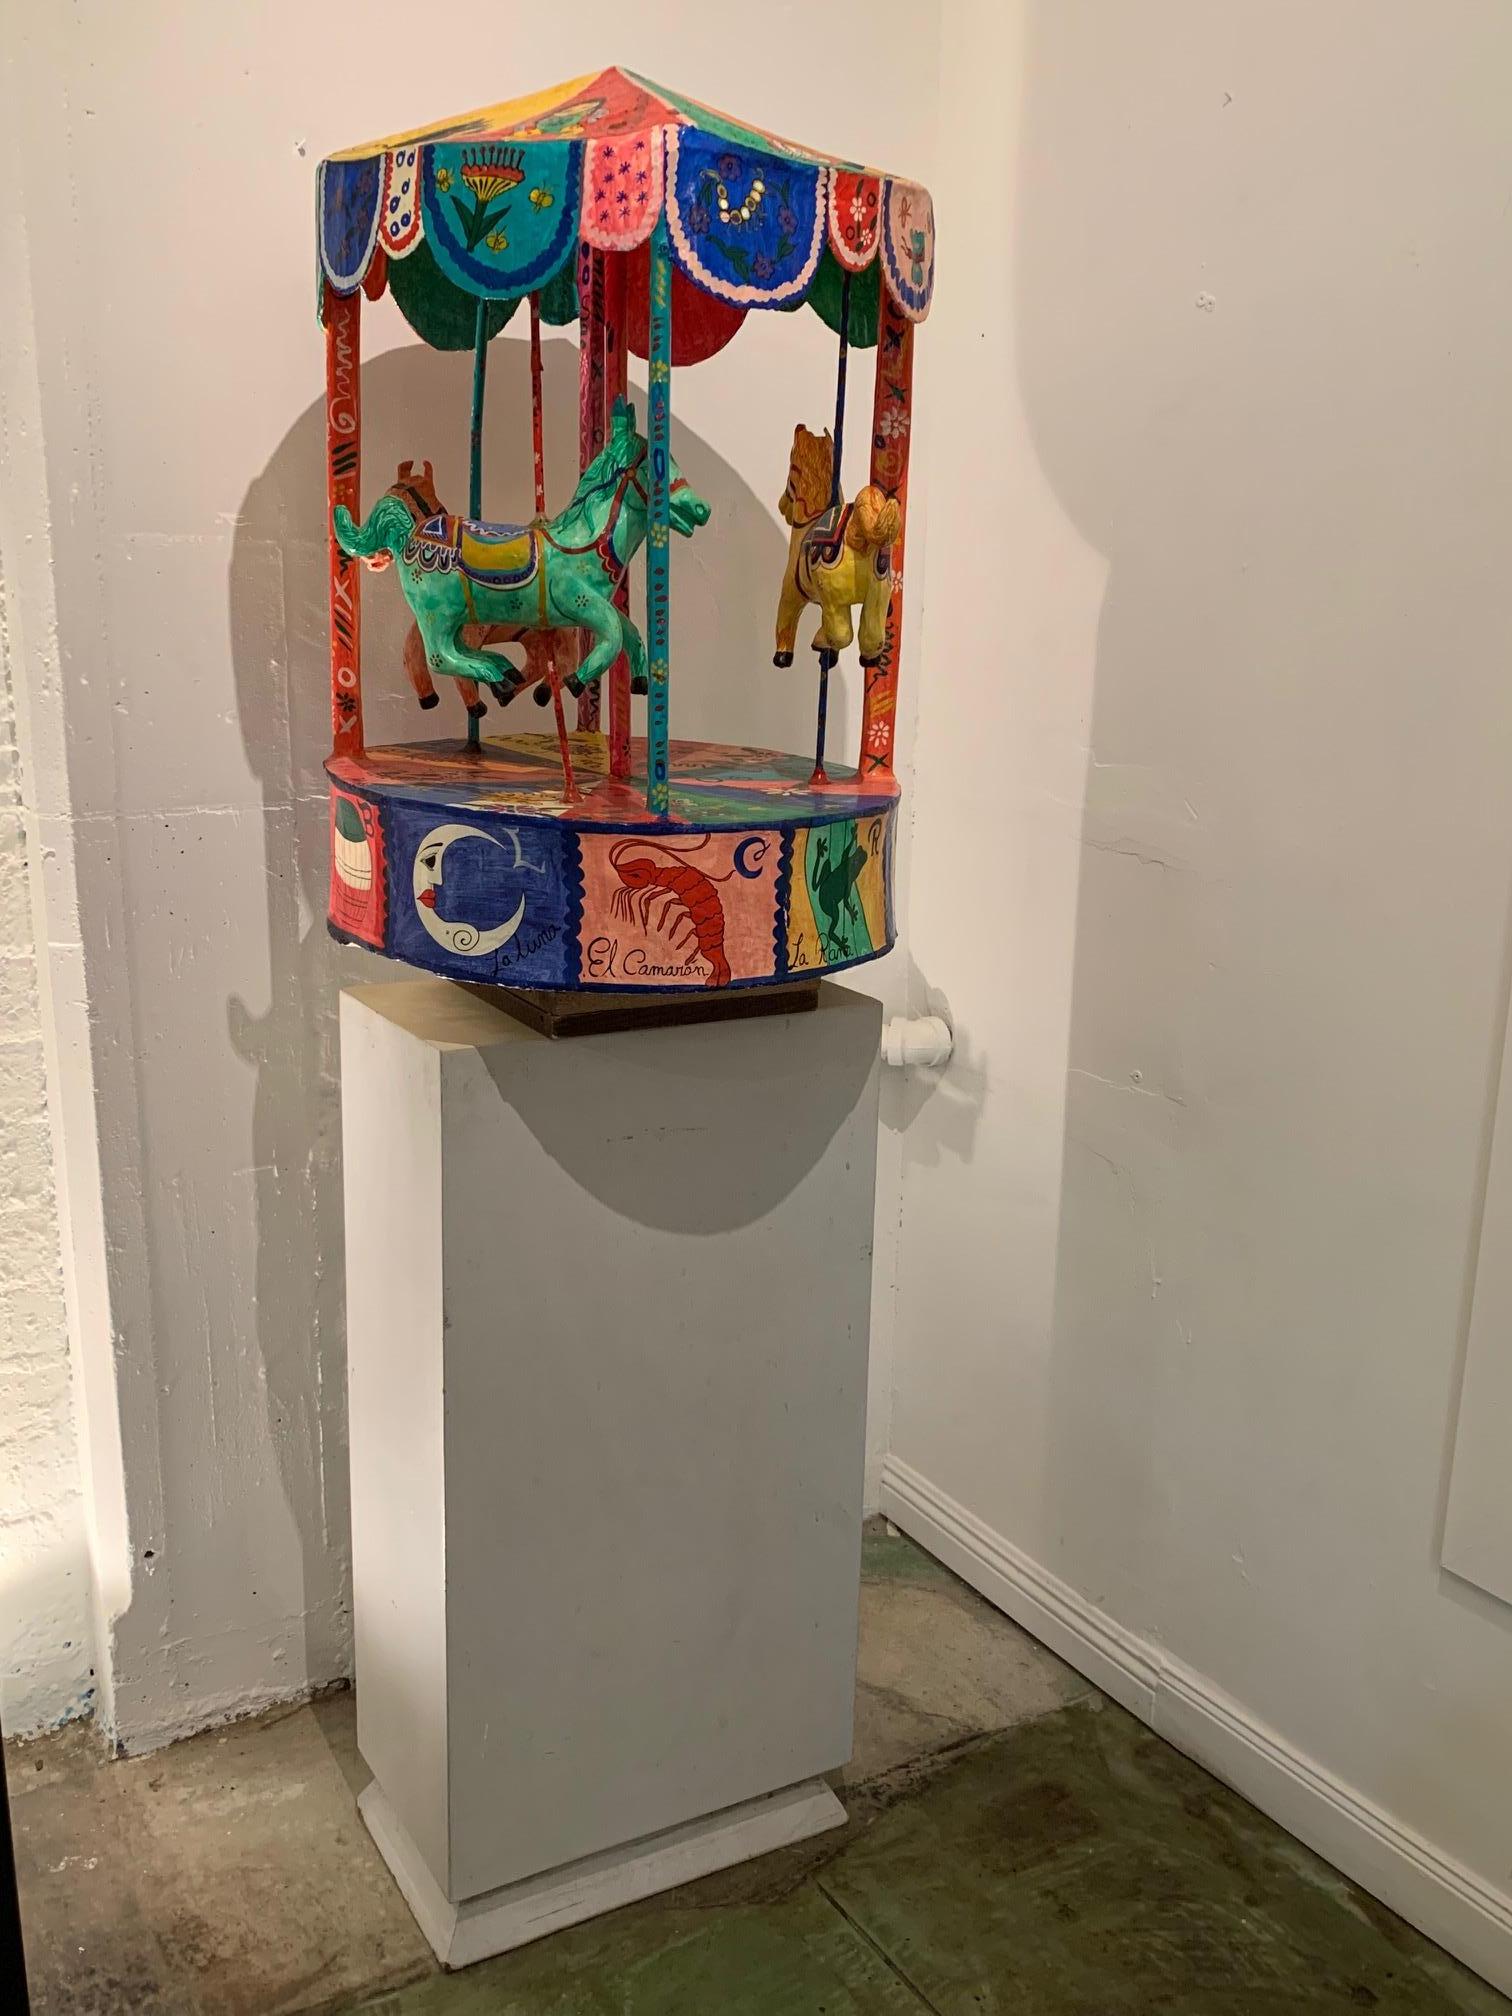 Monumental vintage figurative Mexican Folk Art carousel sculpture by Mexican artist Moises Rodriguez. Comprised out of papier-mâché the whimsical carousel sculpture highlights and emphasizes the importance of 